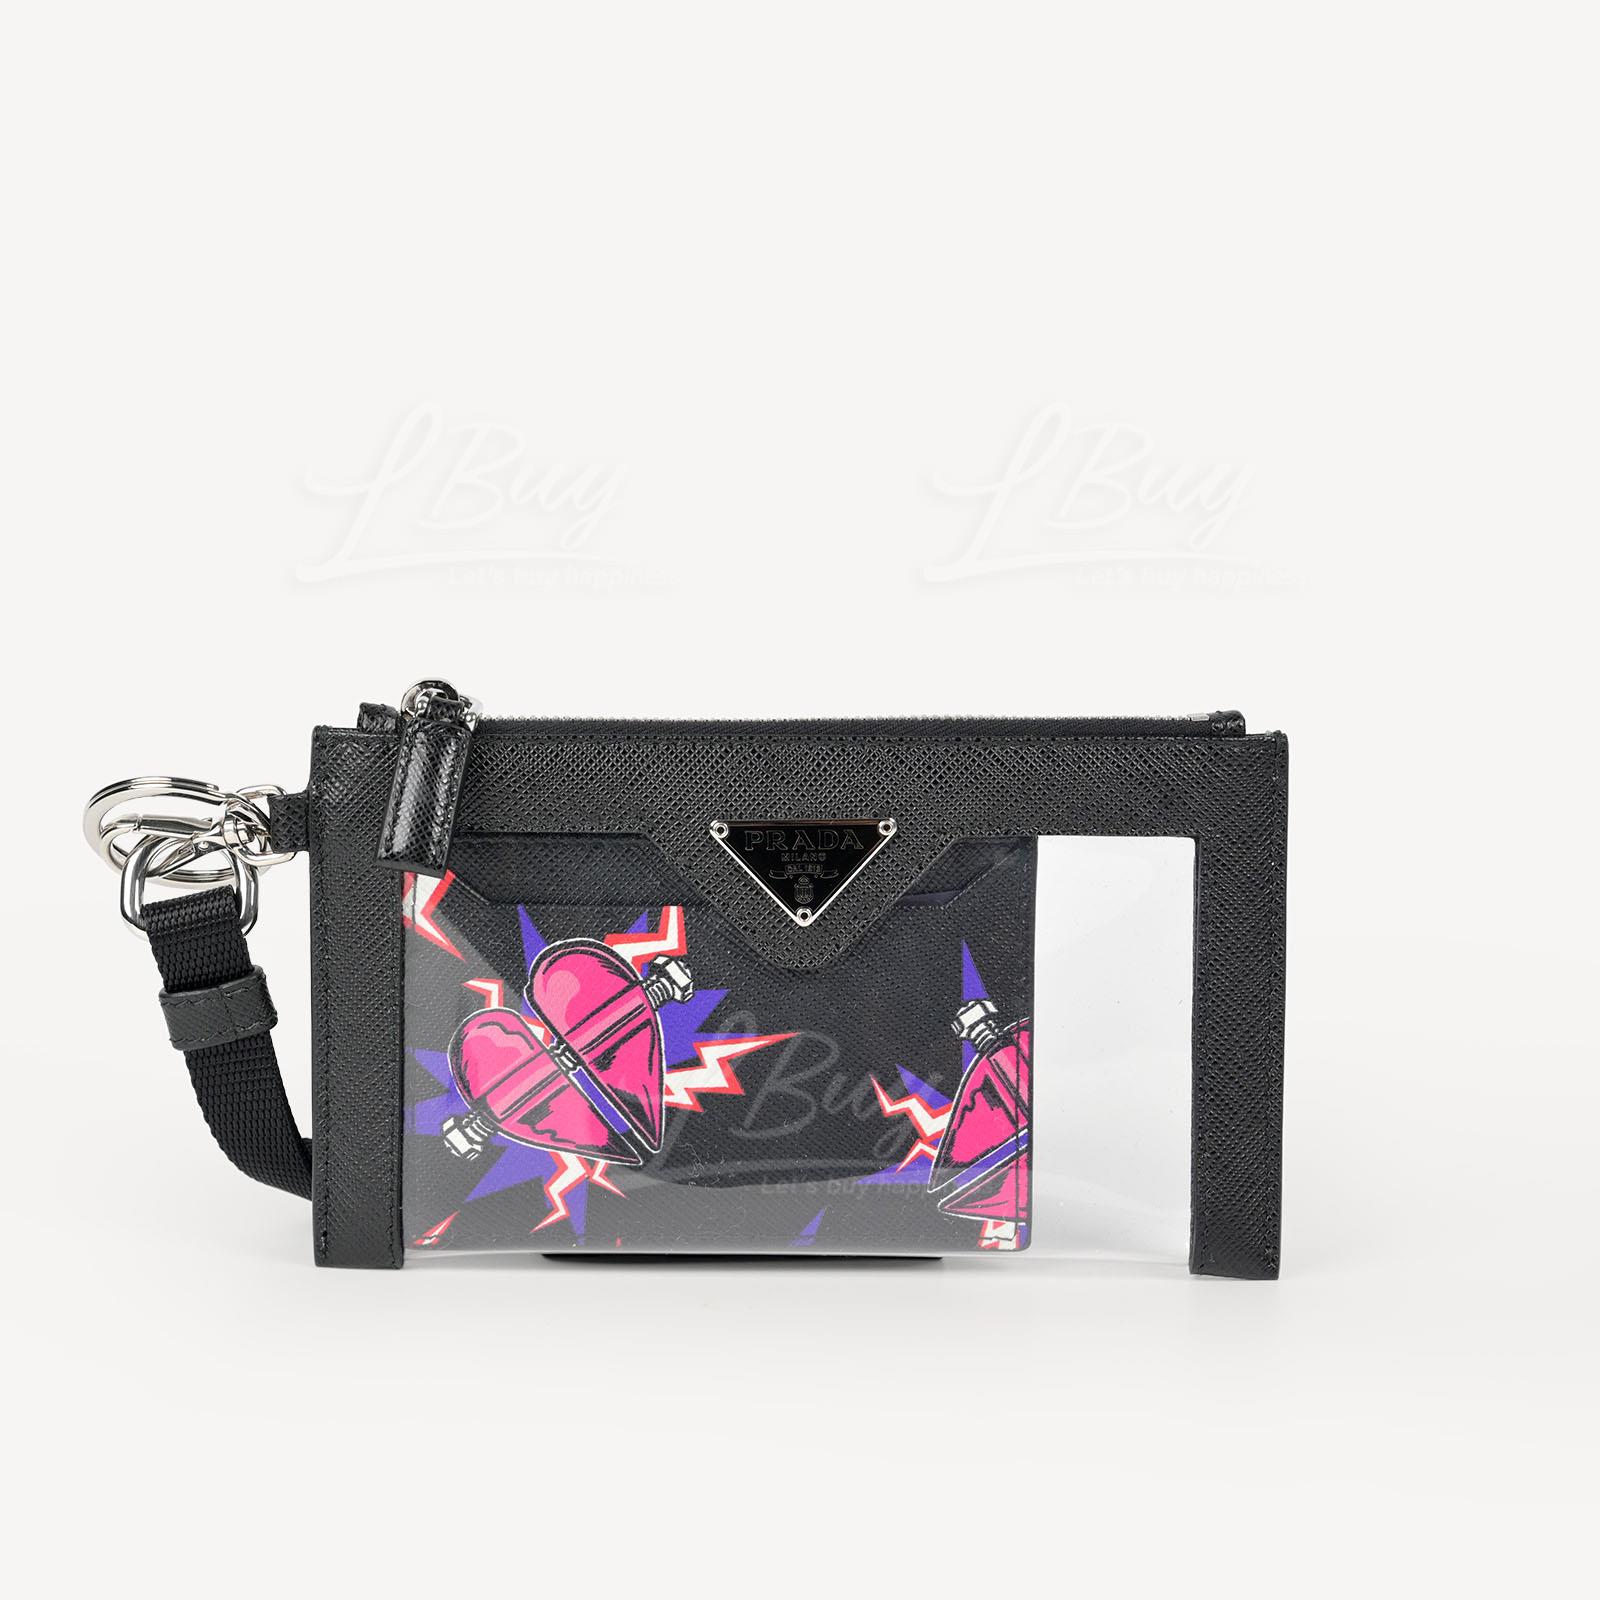 Prada Saffiano Print PVC and Leather Pink Heart Print Card Holder with Shoulder Strap 2TT097